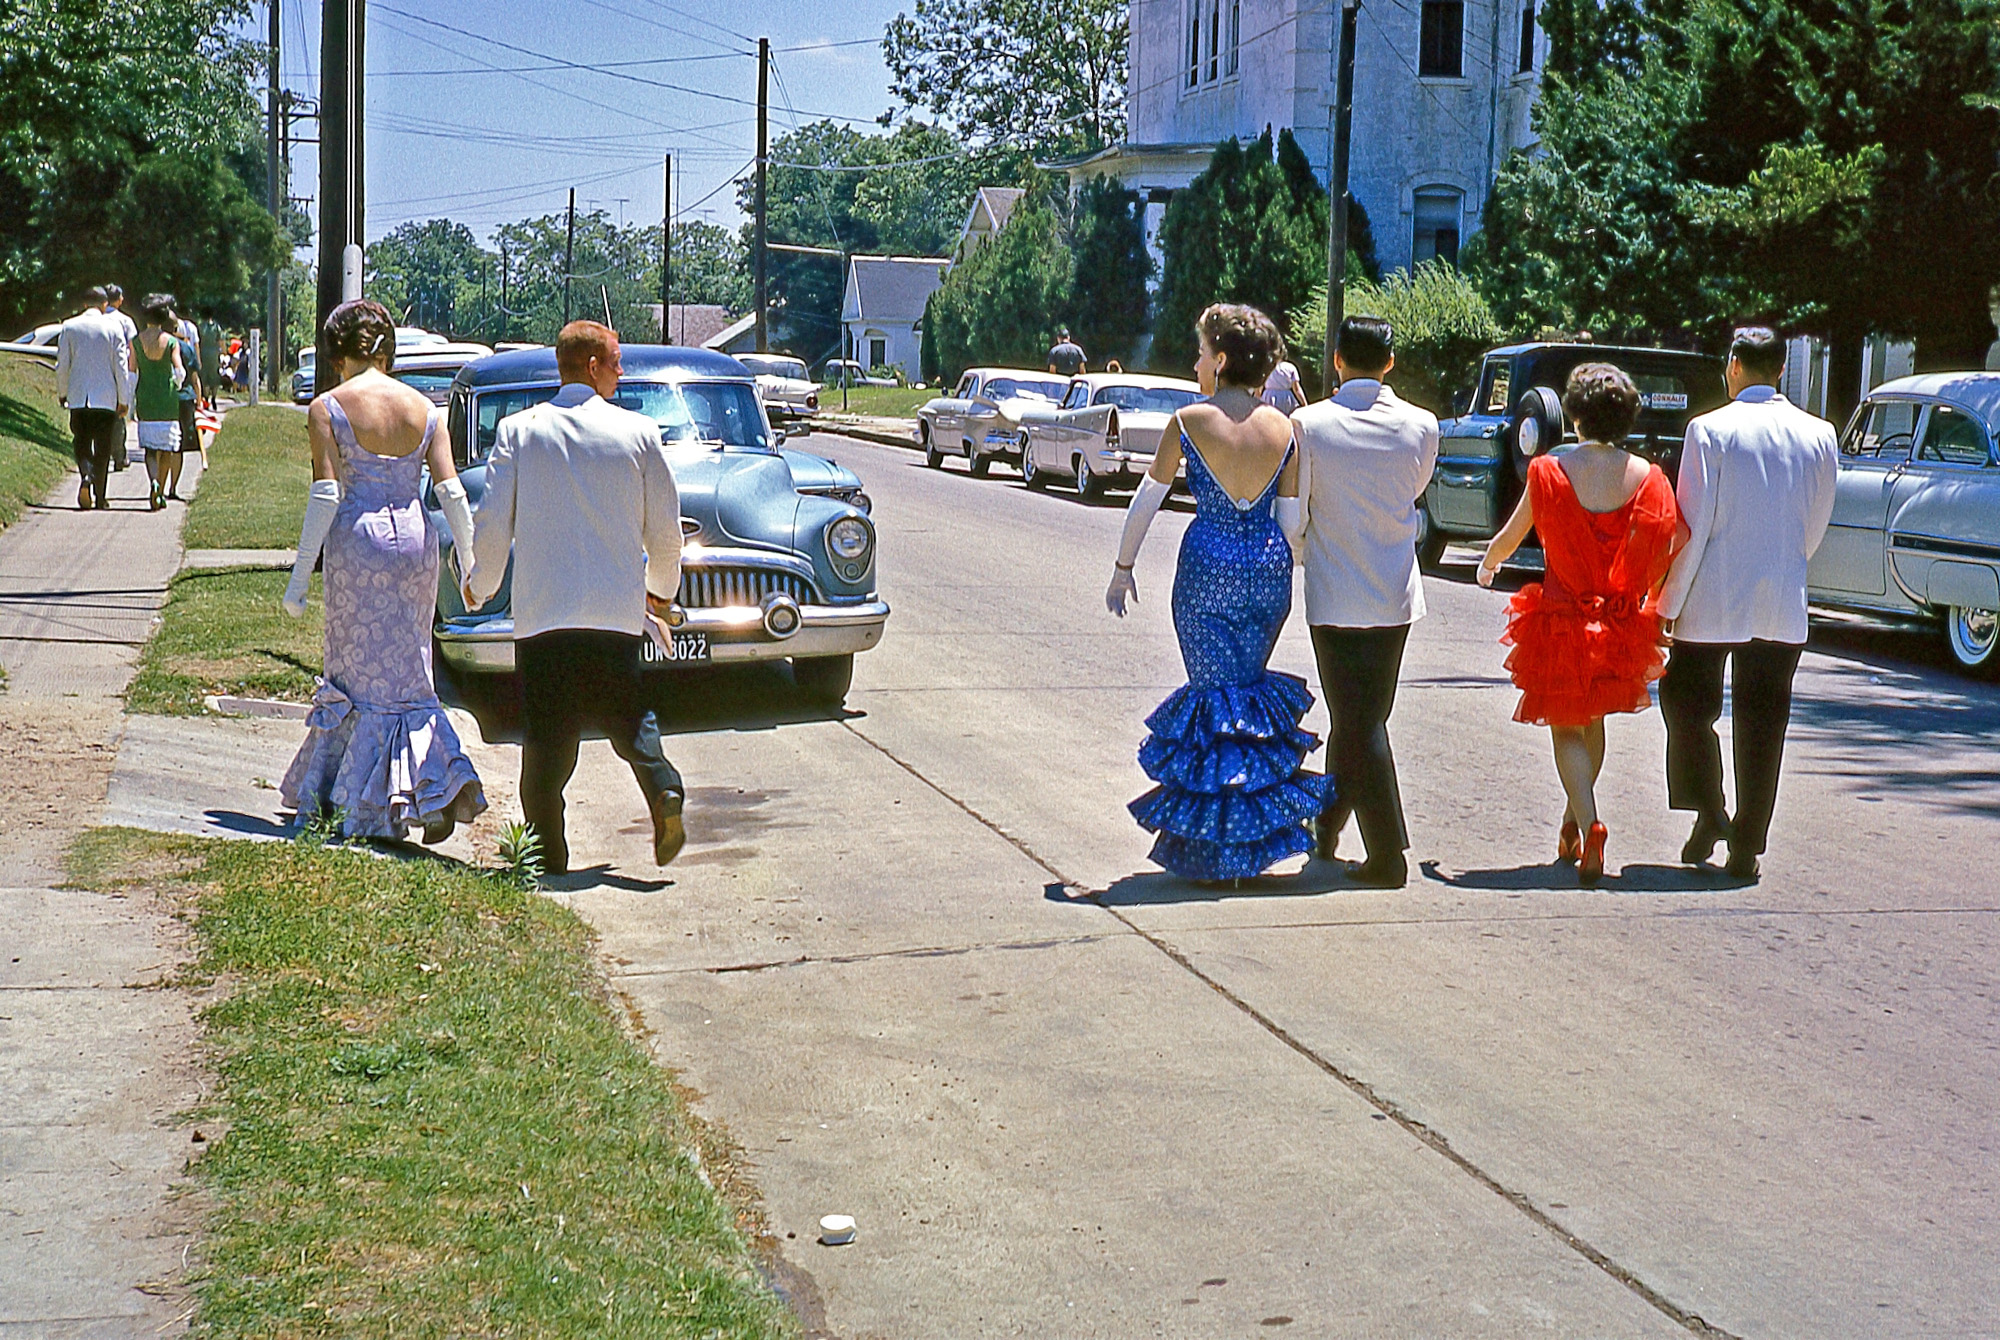 Taken at the Spring Festival in Brenham, Texas. May 1962. You can just make out a Connally sticker in the back window of the pickup across the street. Kodachrome slide, taken by my dad. View full size.